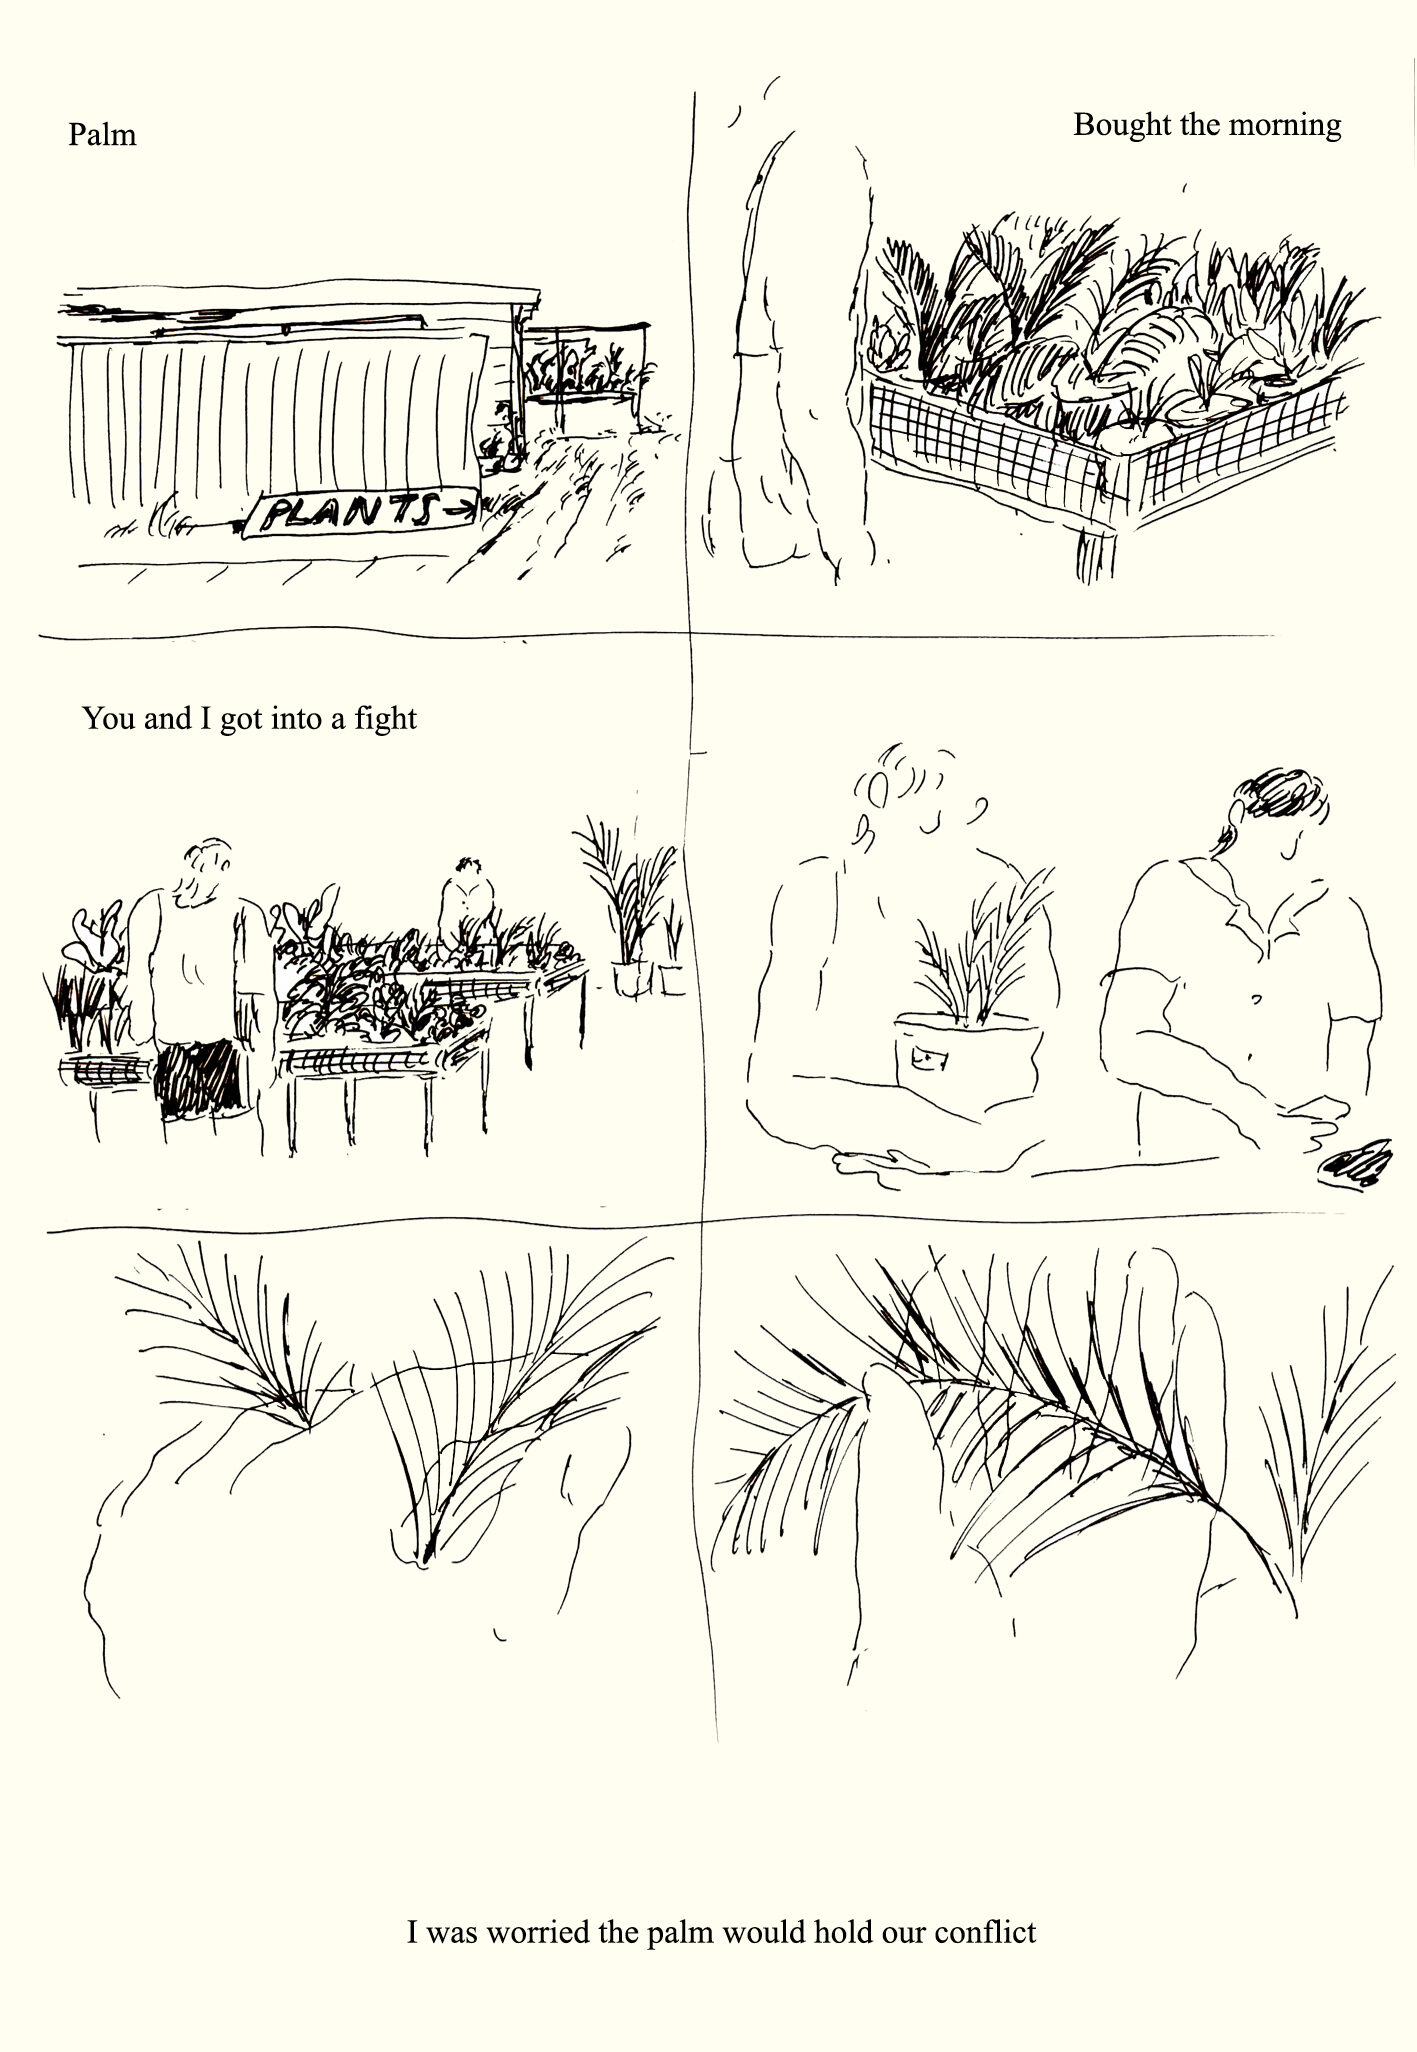 Black and white page broken into six panels 1. Plant shop 2. Figure perusing tray of small palms 3. Zoom out, two figures in the shop in different aisles 4. Two figures buying the palm 5. Close up of hands running through the fronds 6. Close up of hand holding the fronds